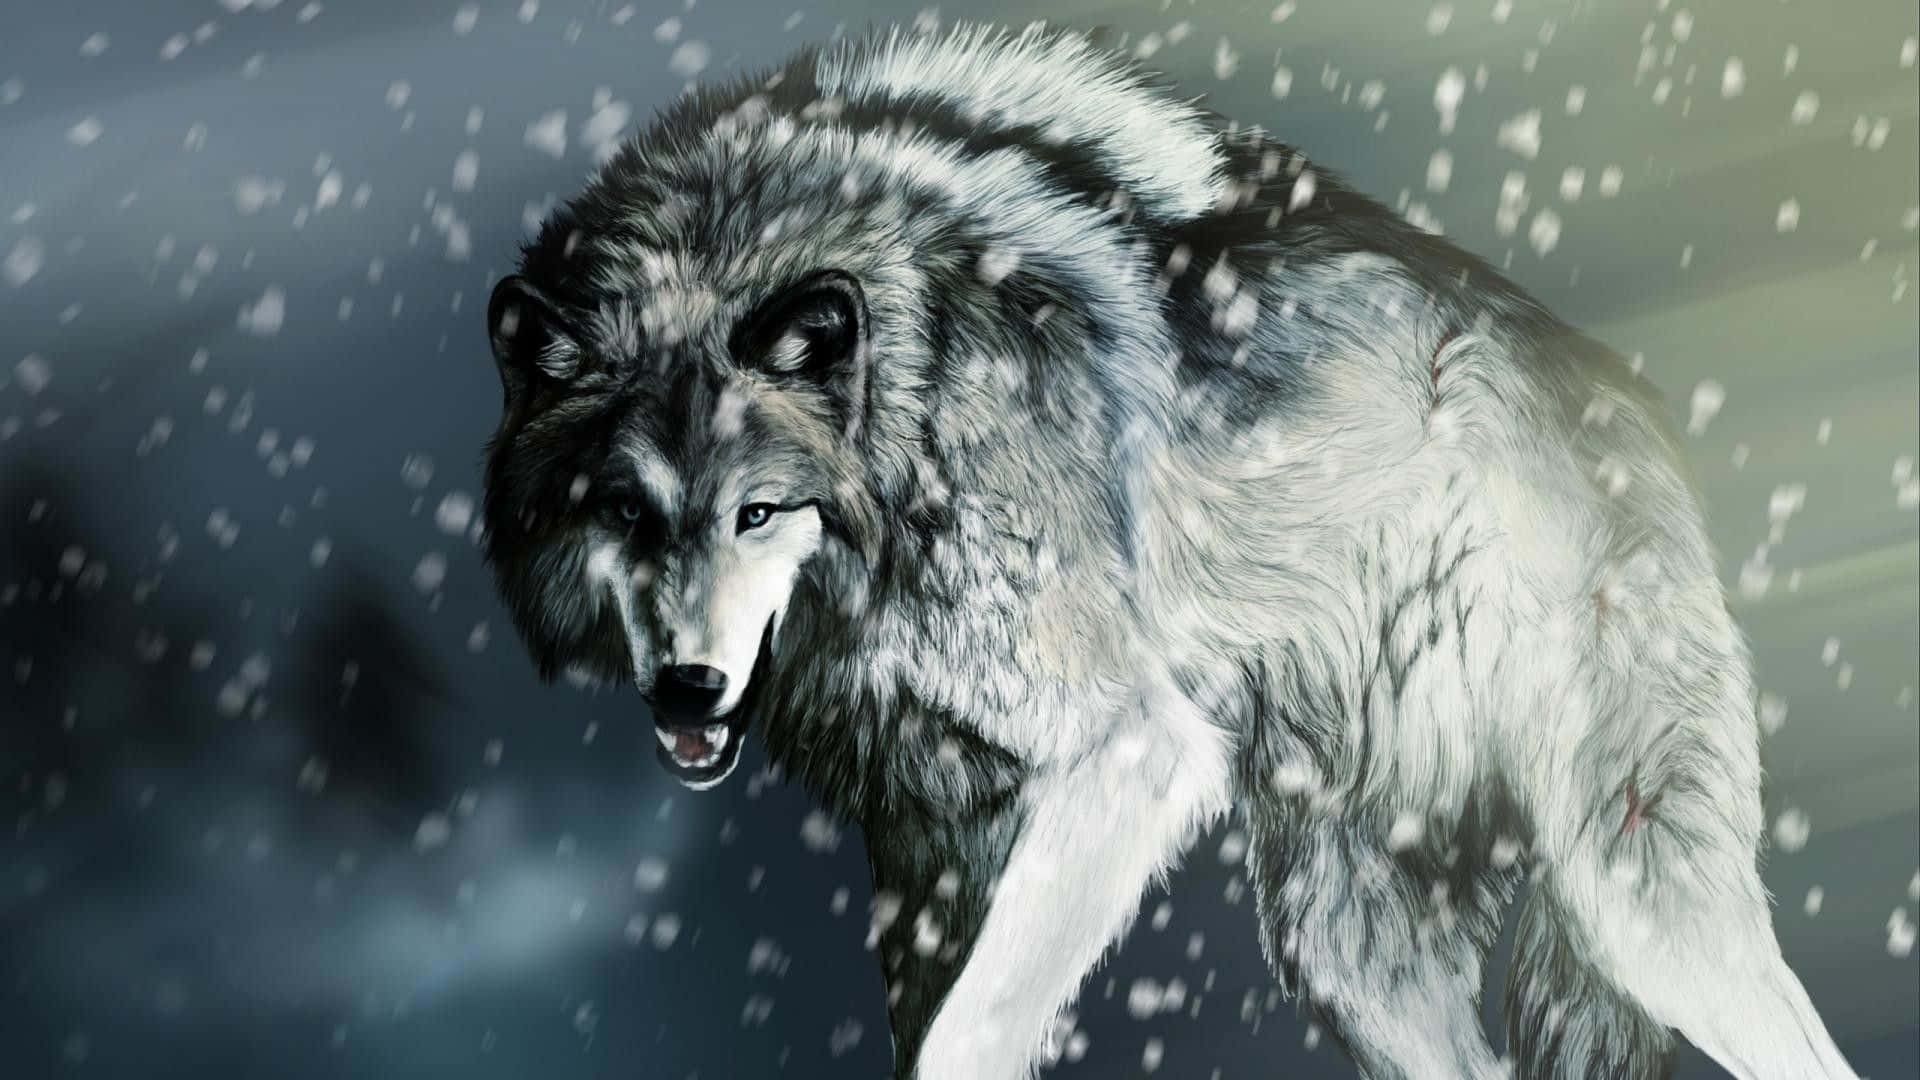 Majestic Wolf in the Wild Wallpaper